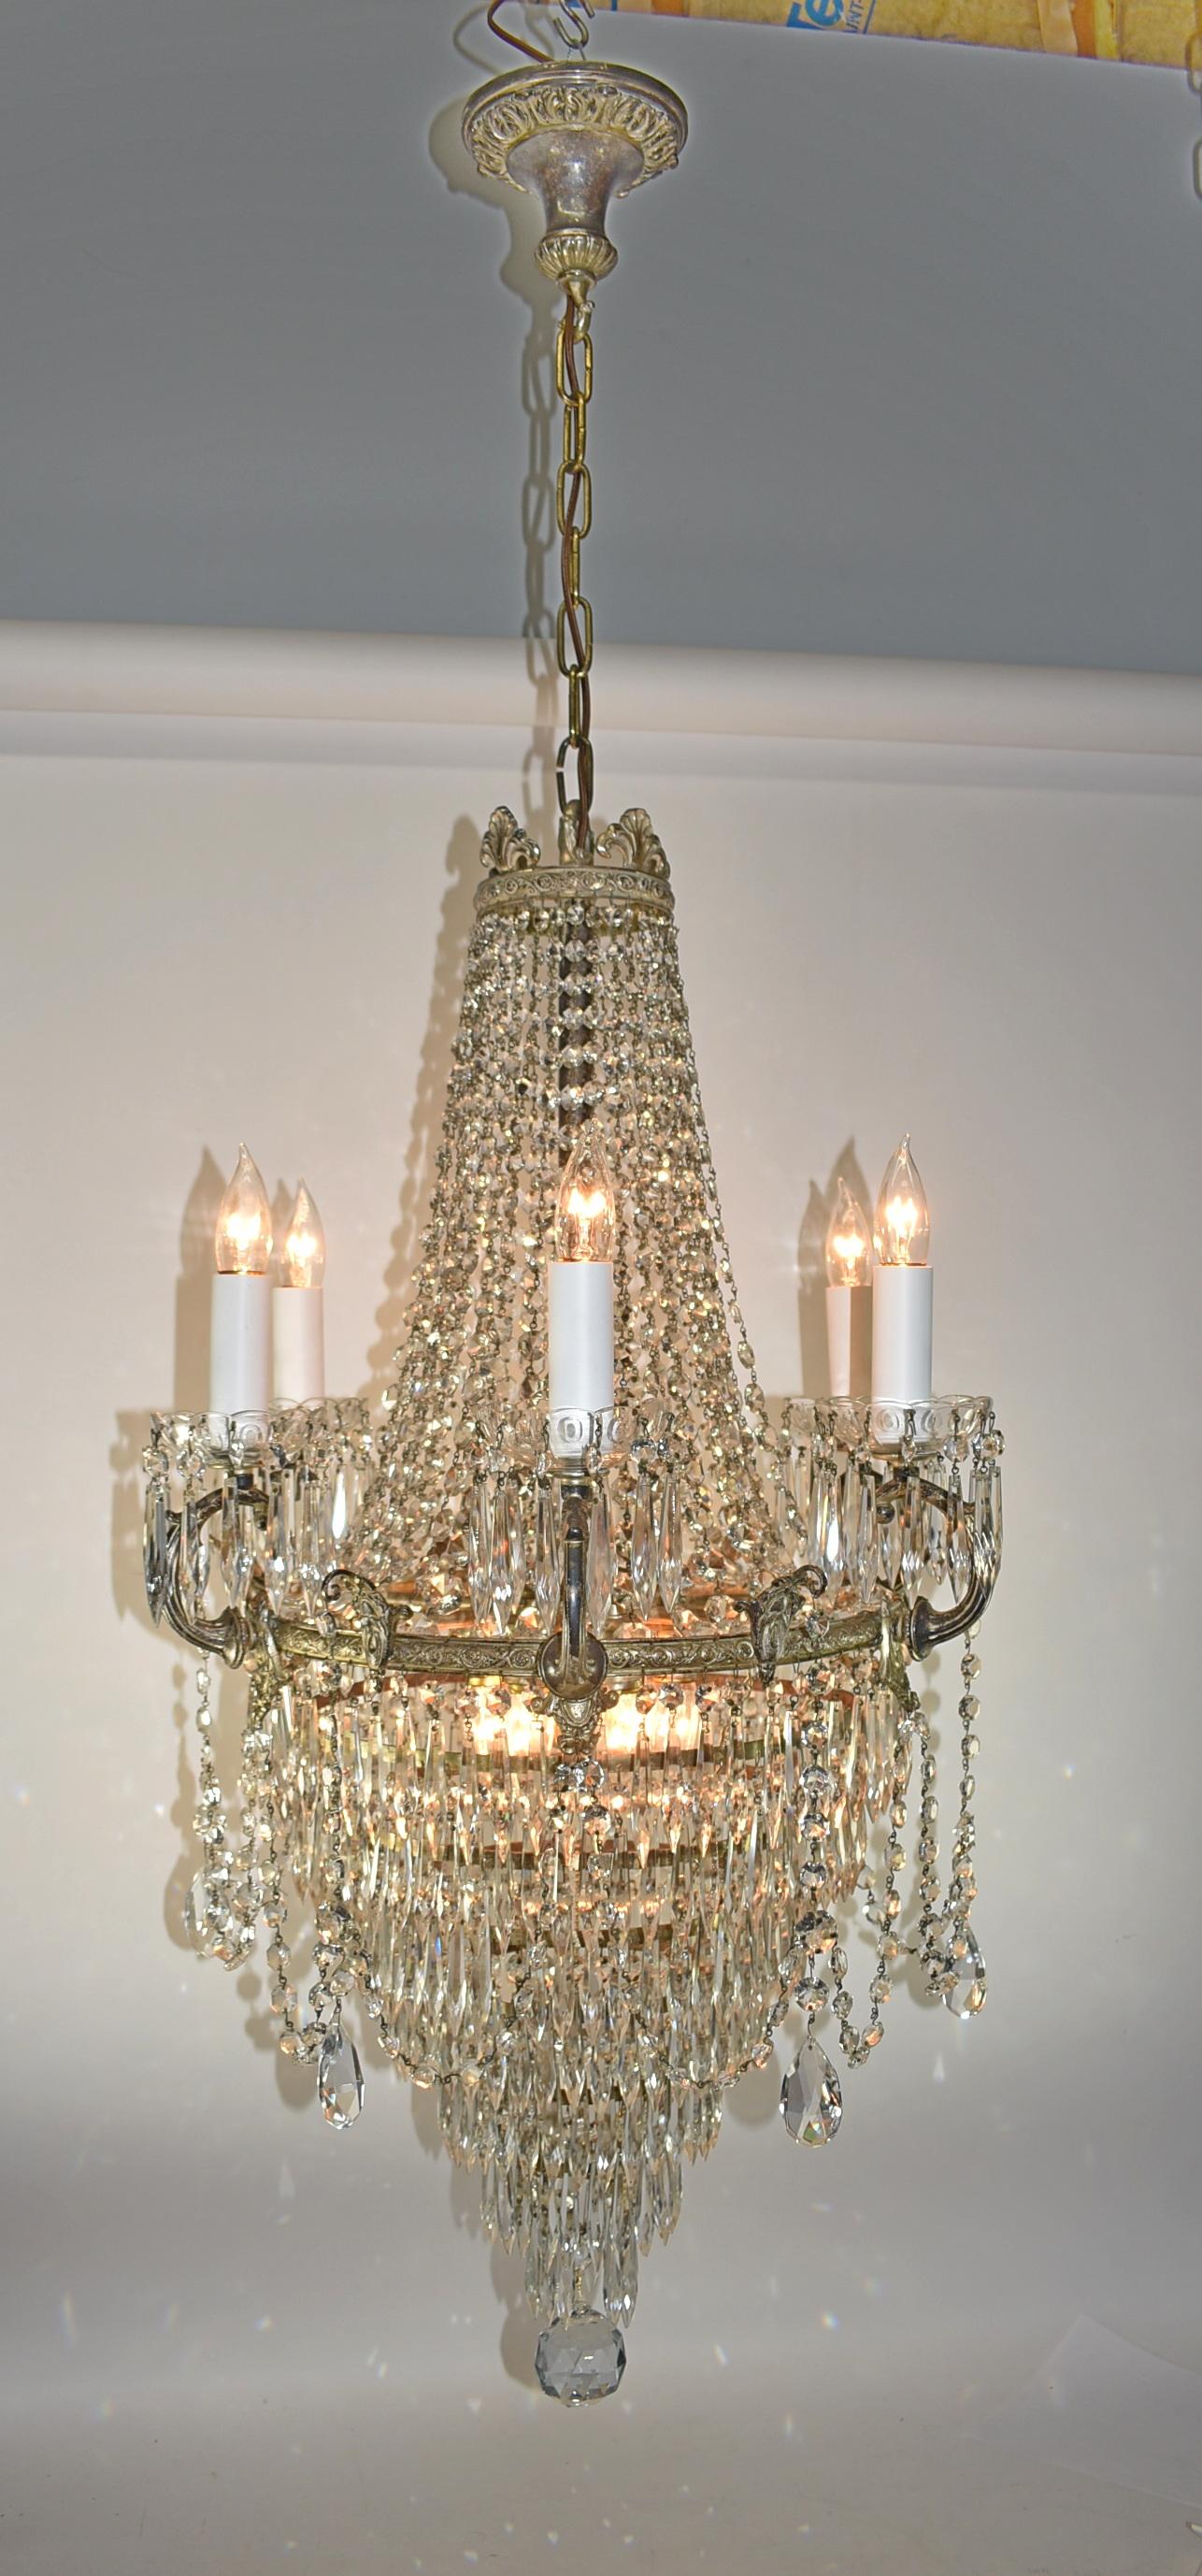 Antique Crystal and Brass Chandelier. circa 1910. Waterfall chandelier with 7 tiers of graduated circles with hanging crystal prisms and draped crystals, 12 sockets total, 6 inside sockets and 6 candle sockets. All original distressed Silvertone